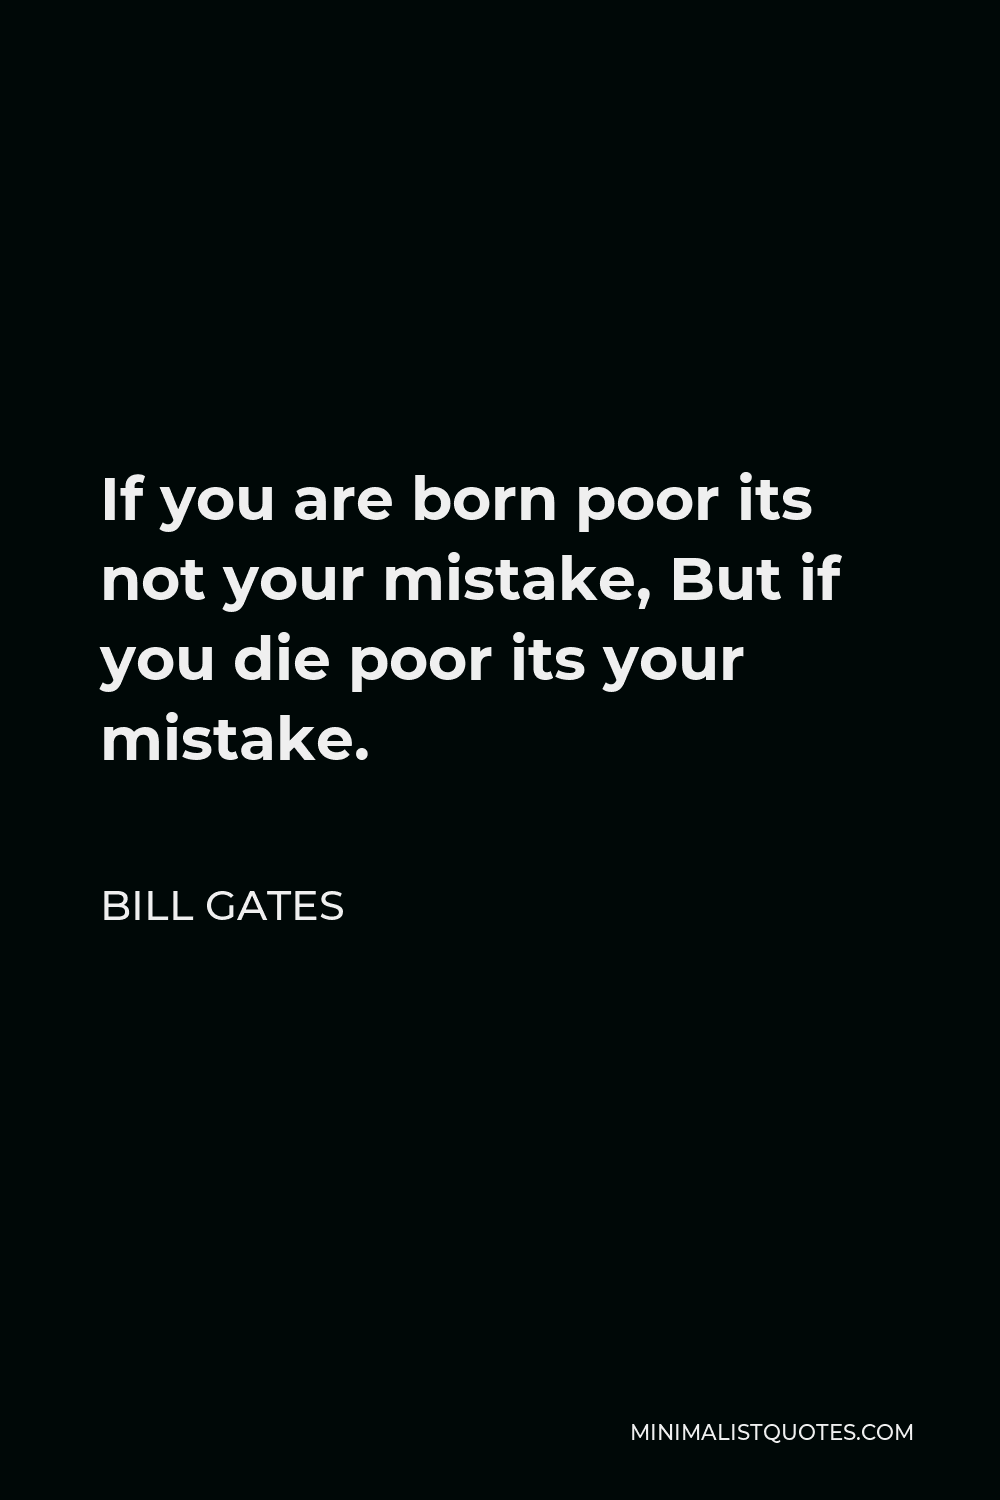 Bill Gates Quote - If you are born Poor its not your mistake, but if you die poor its your mistake.